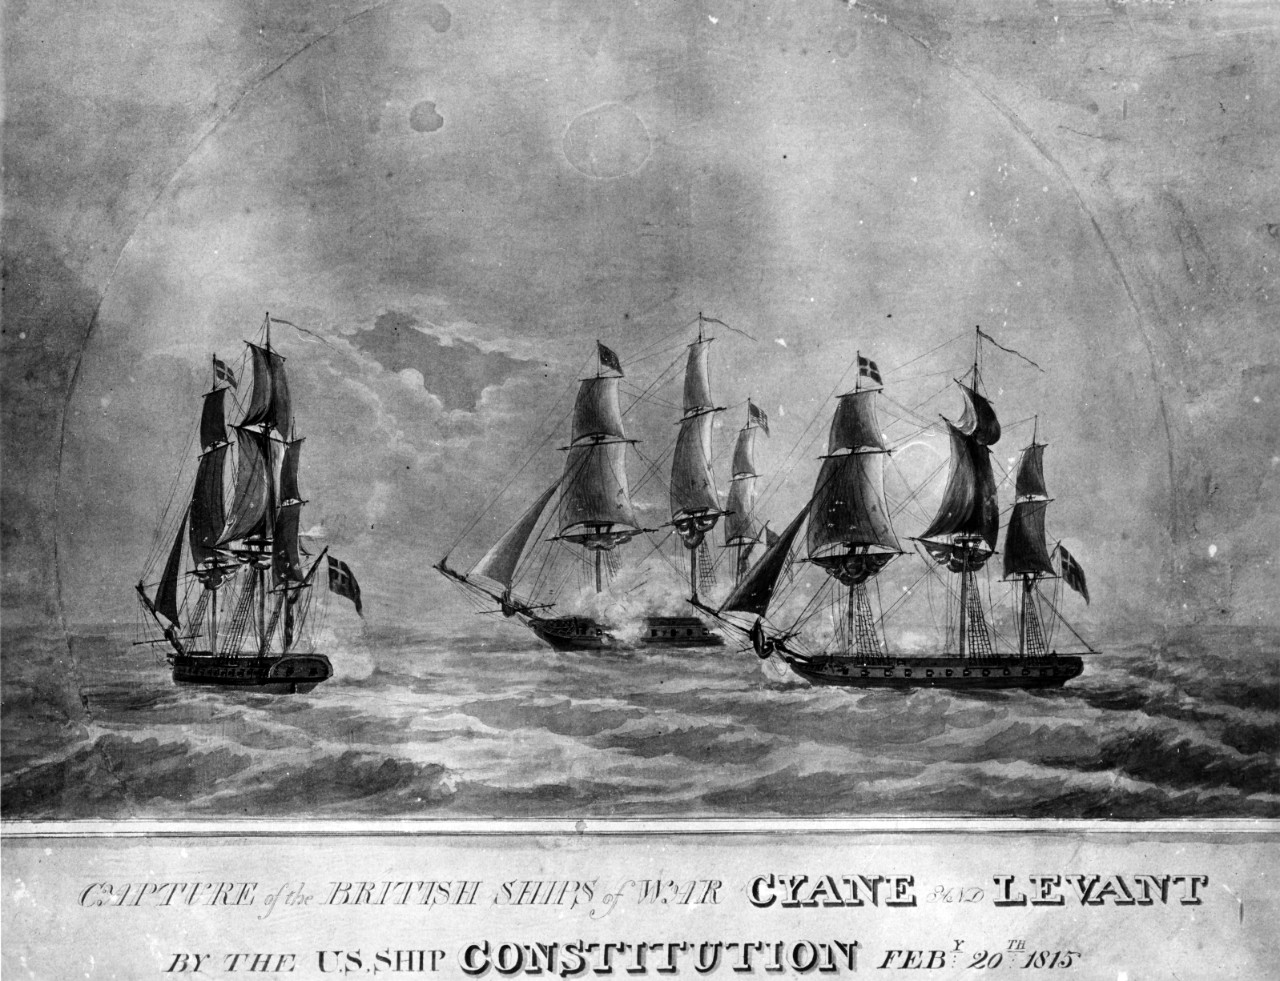 Capture of the British ships of war CYANE and LEVANT by U.S.S. CONSTITUTION, February 1815.